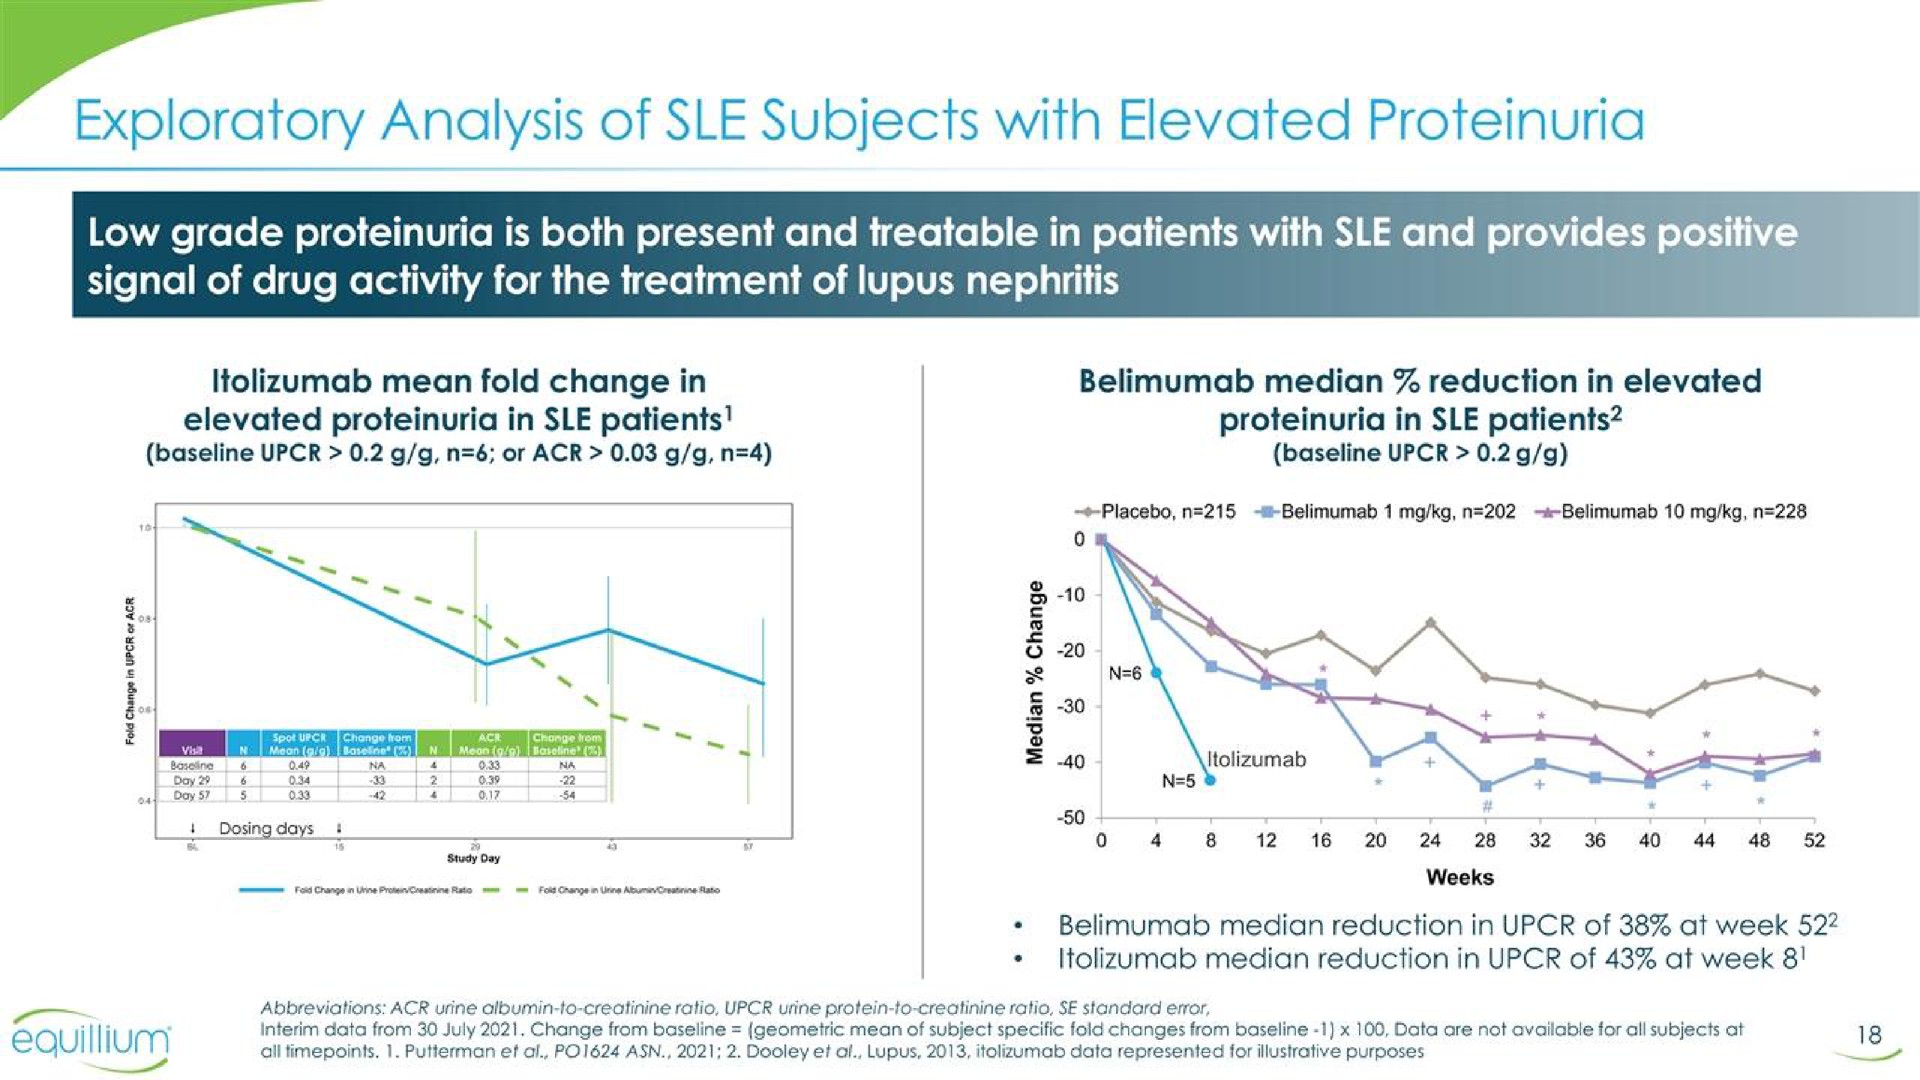 exploratory analysis of subjects with elevated proteinuria | Equillium